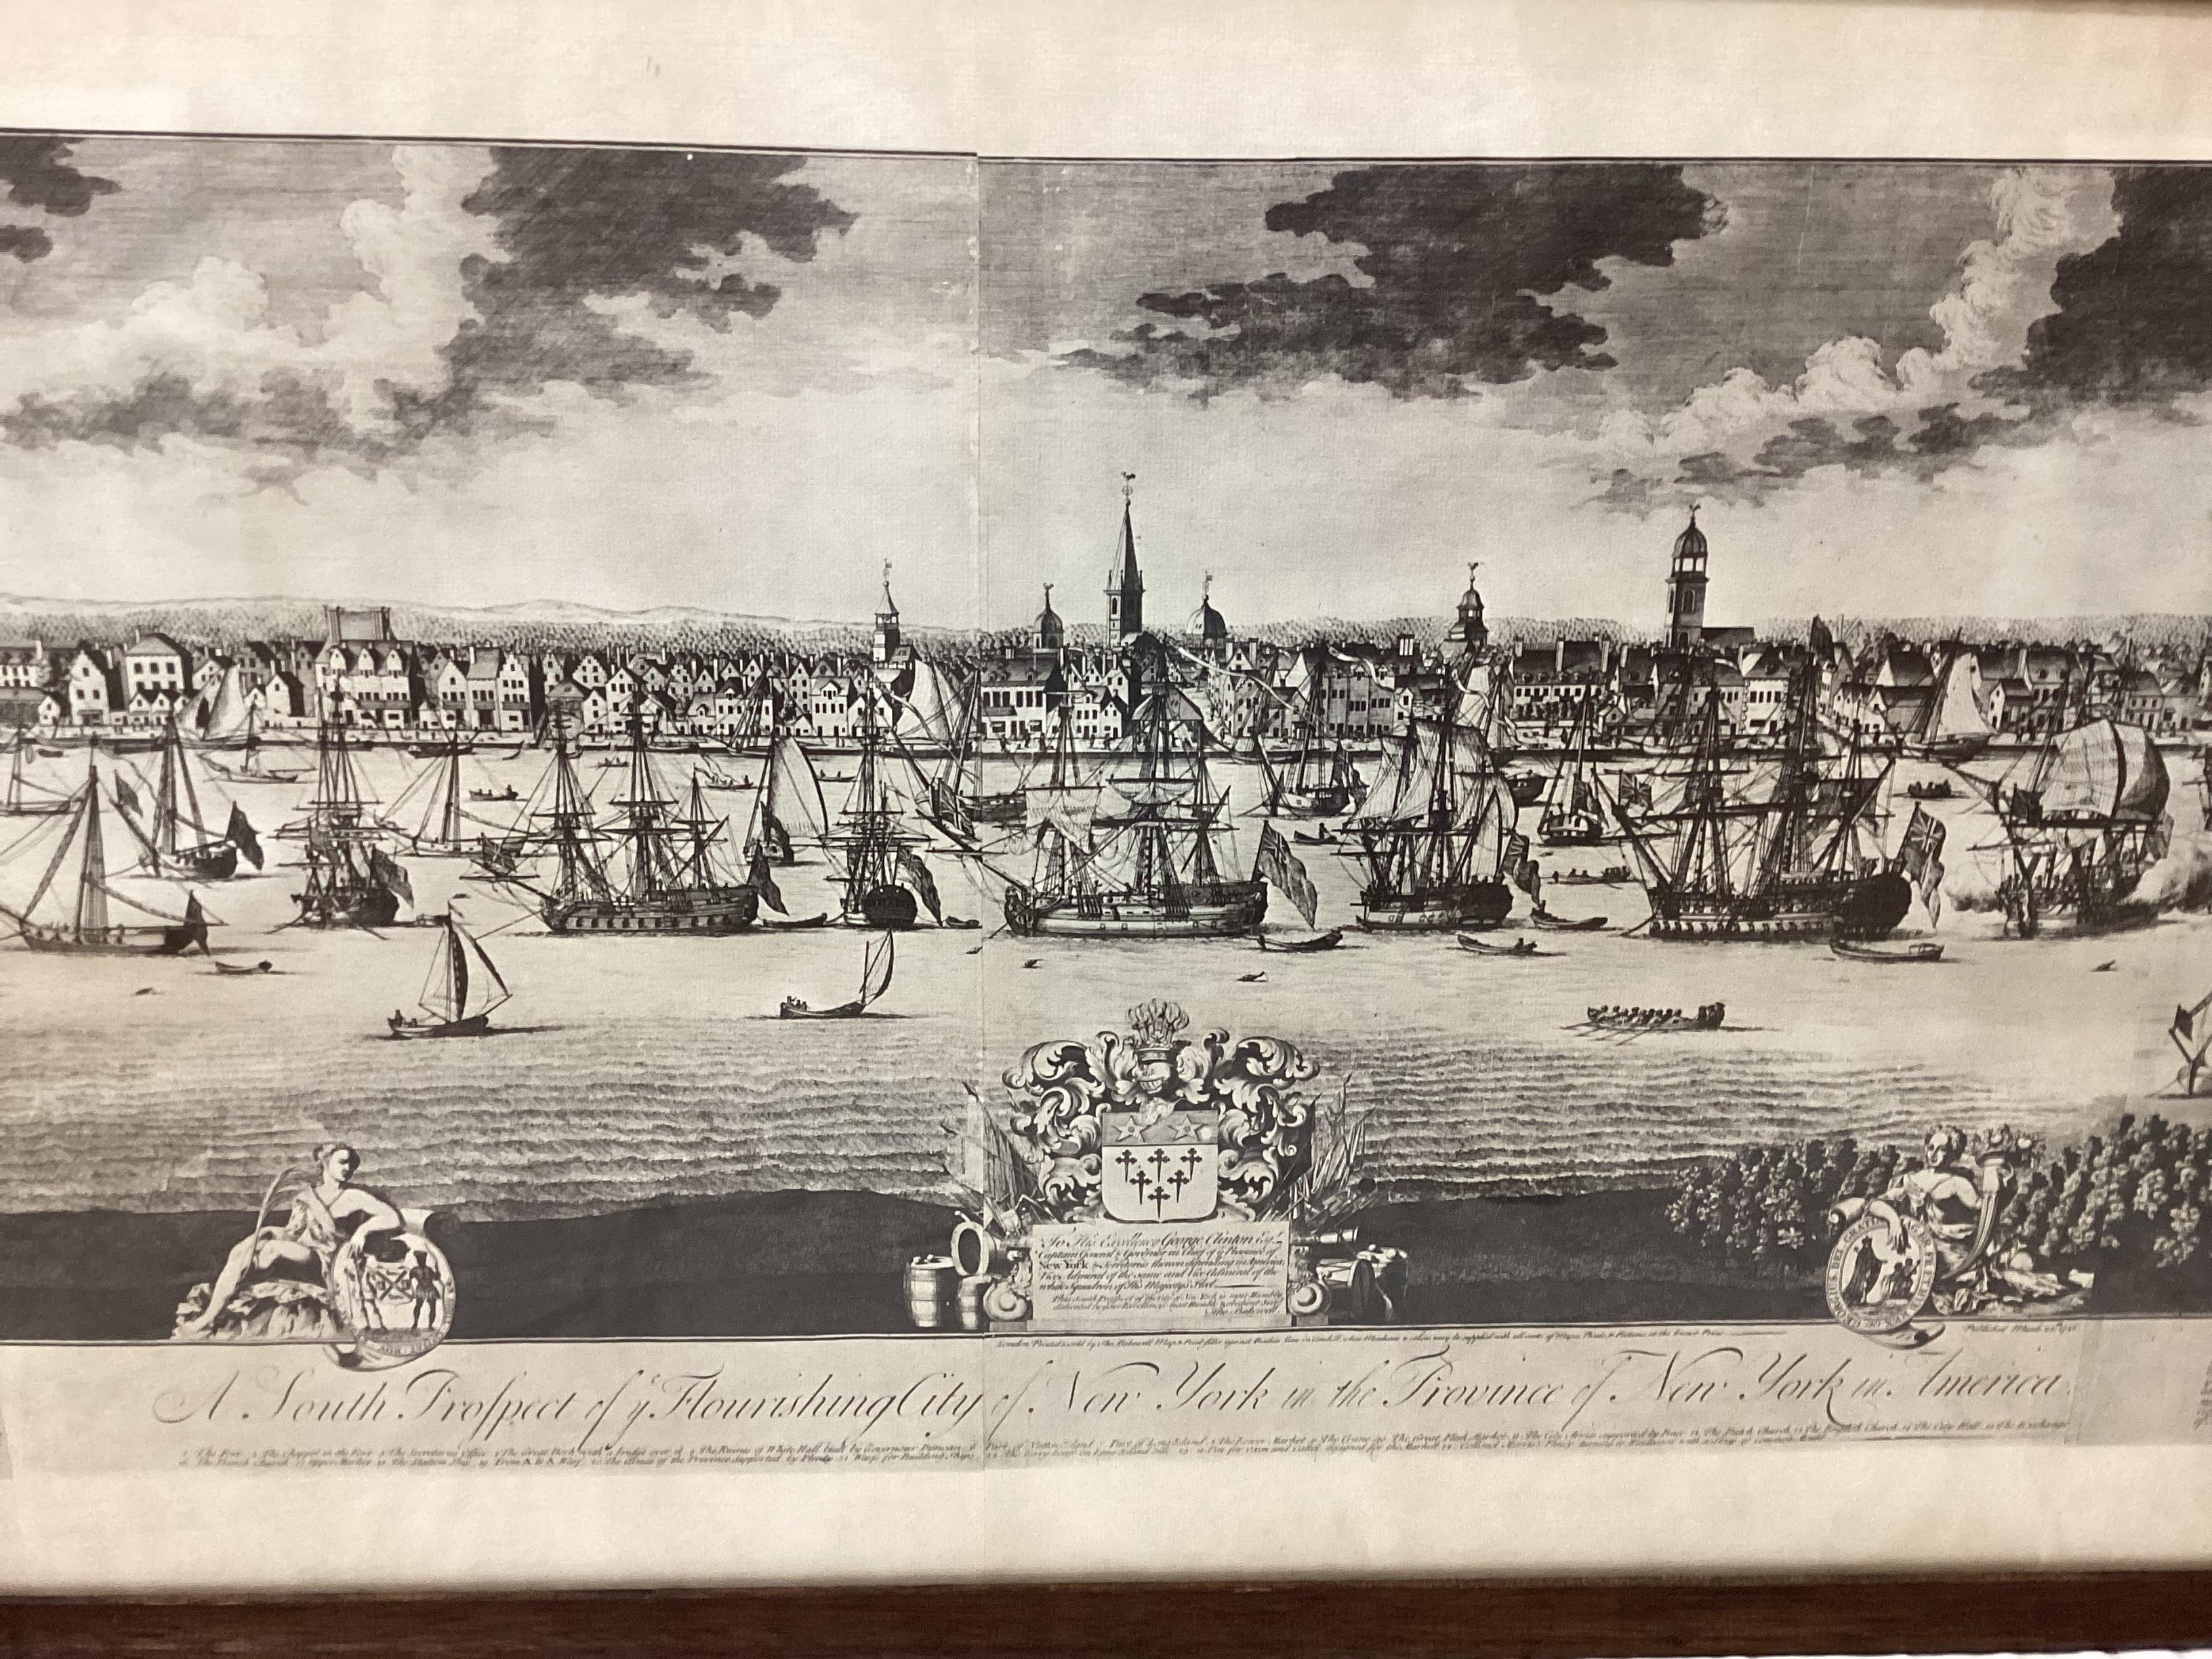 A South Prospect of Ye Flourishing City of New York in the Province of New York. Often referred to as “The Burgis View” after its creator William Burgis, this circa 1717 depiction of Manhattan Island from the vantage point of Brooklyn Heights offers